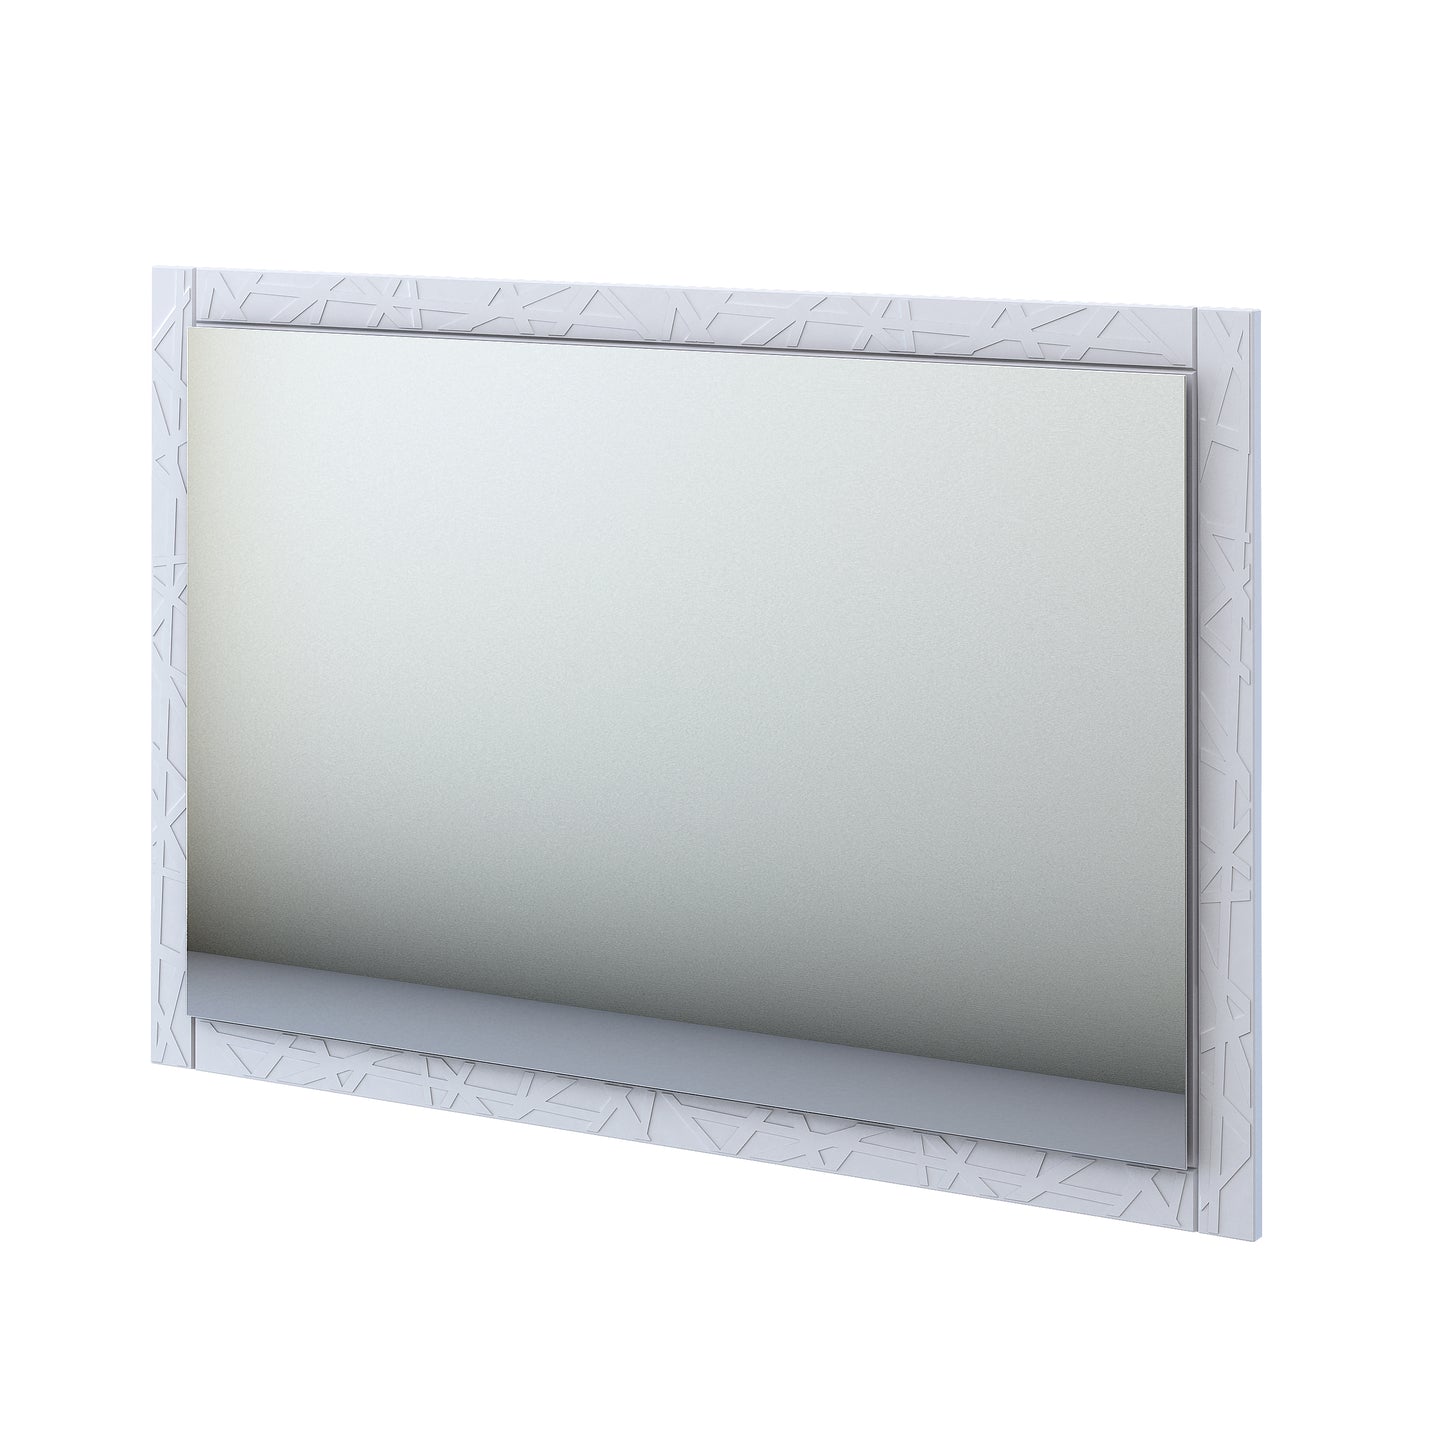 BH Mirror America LED Lighting with Touch Switch